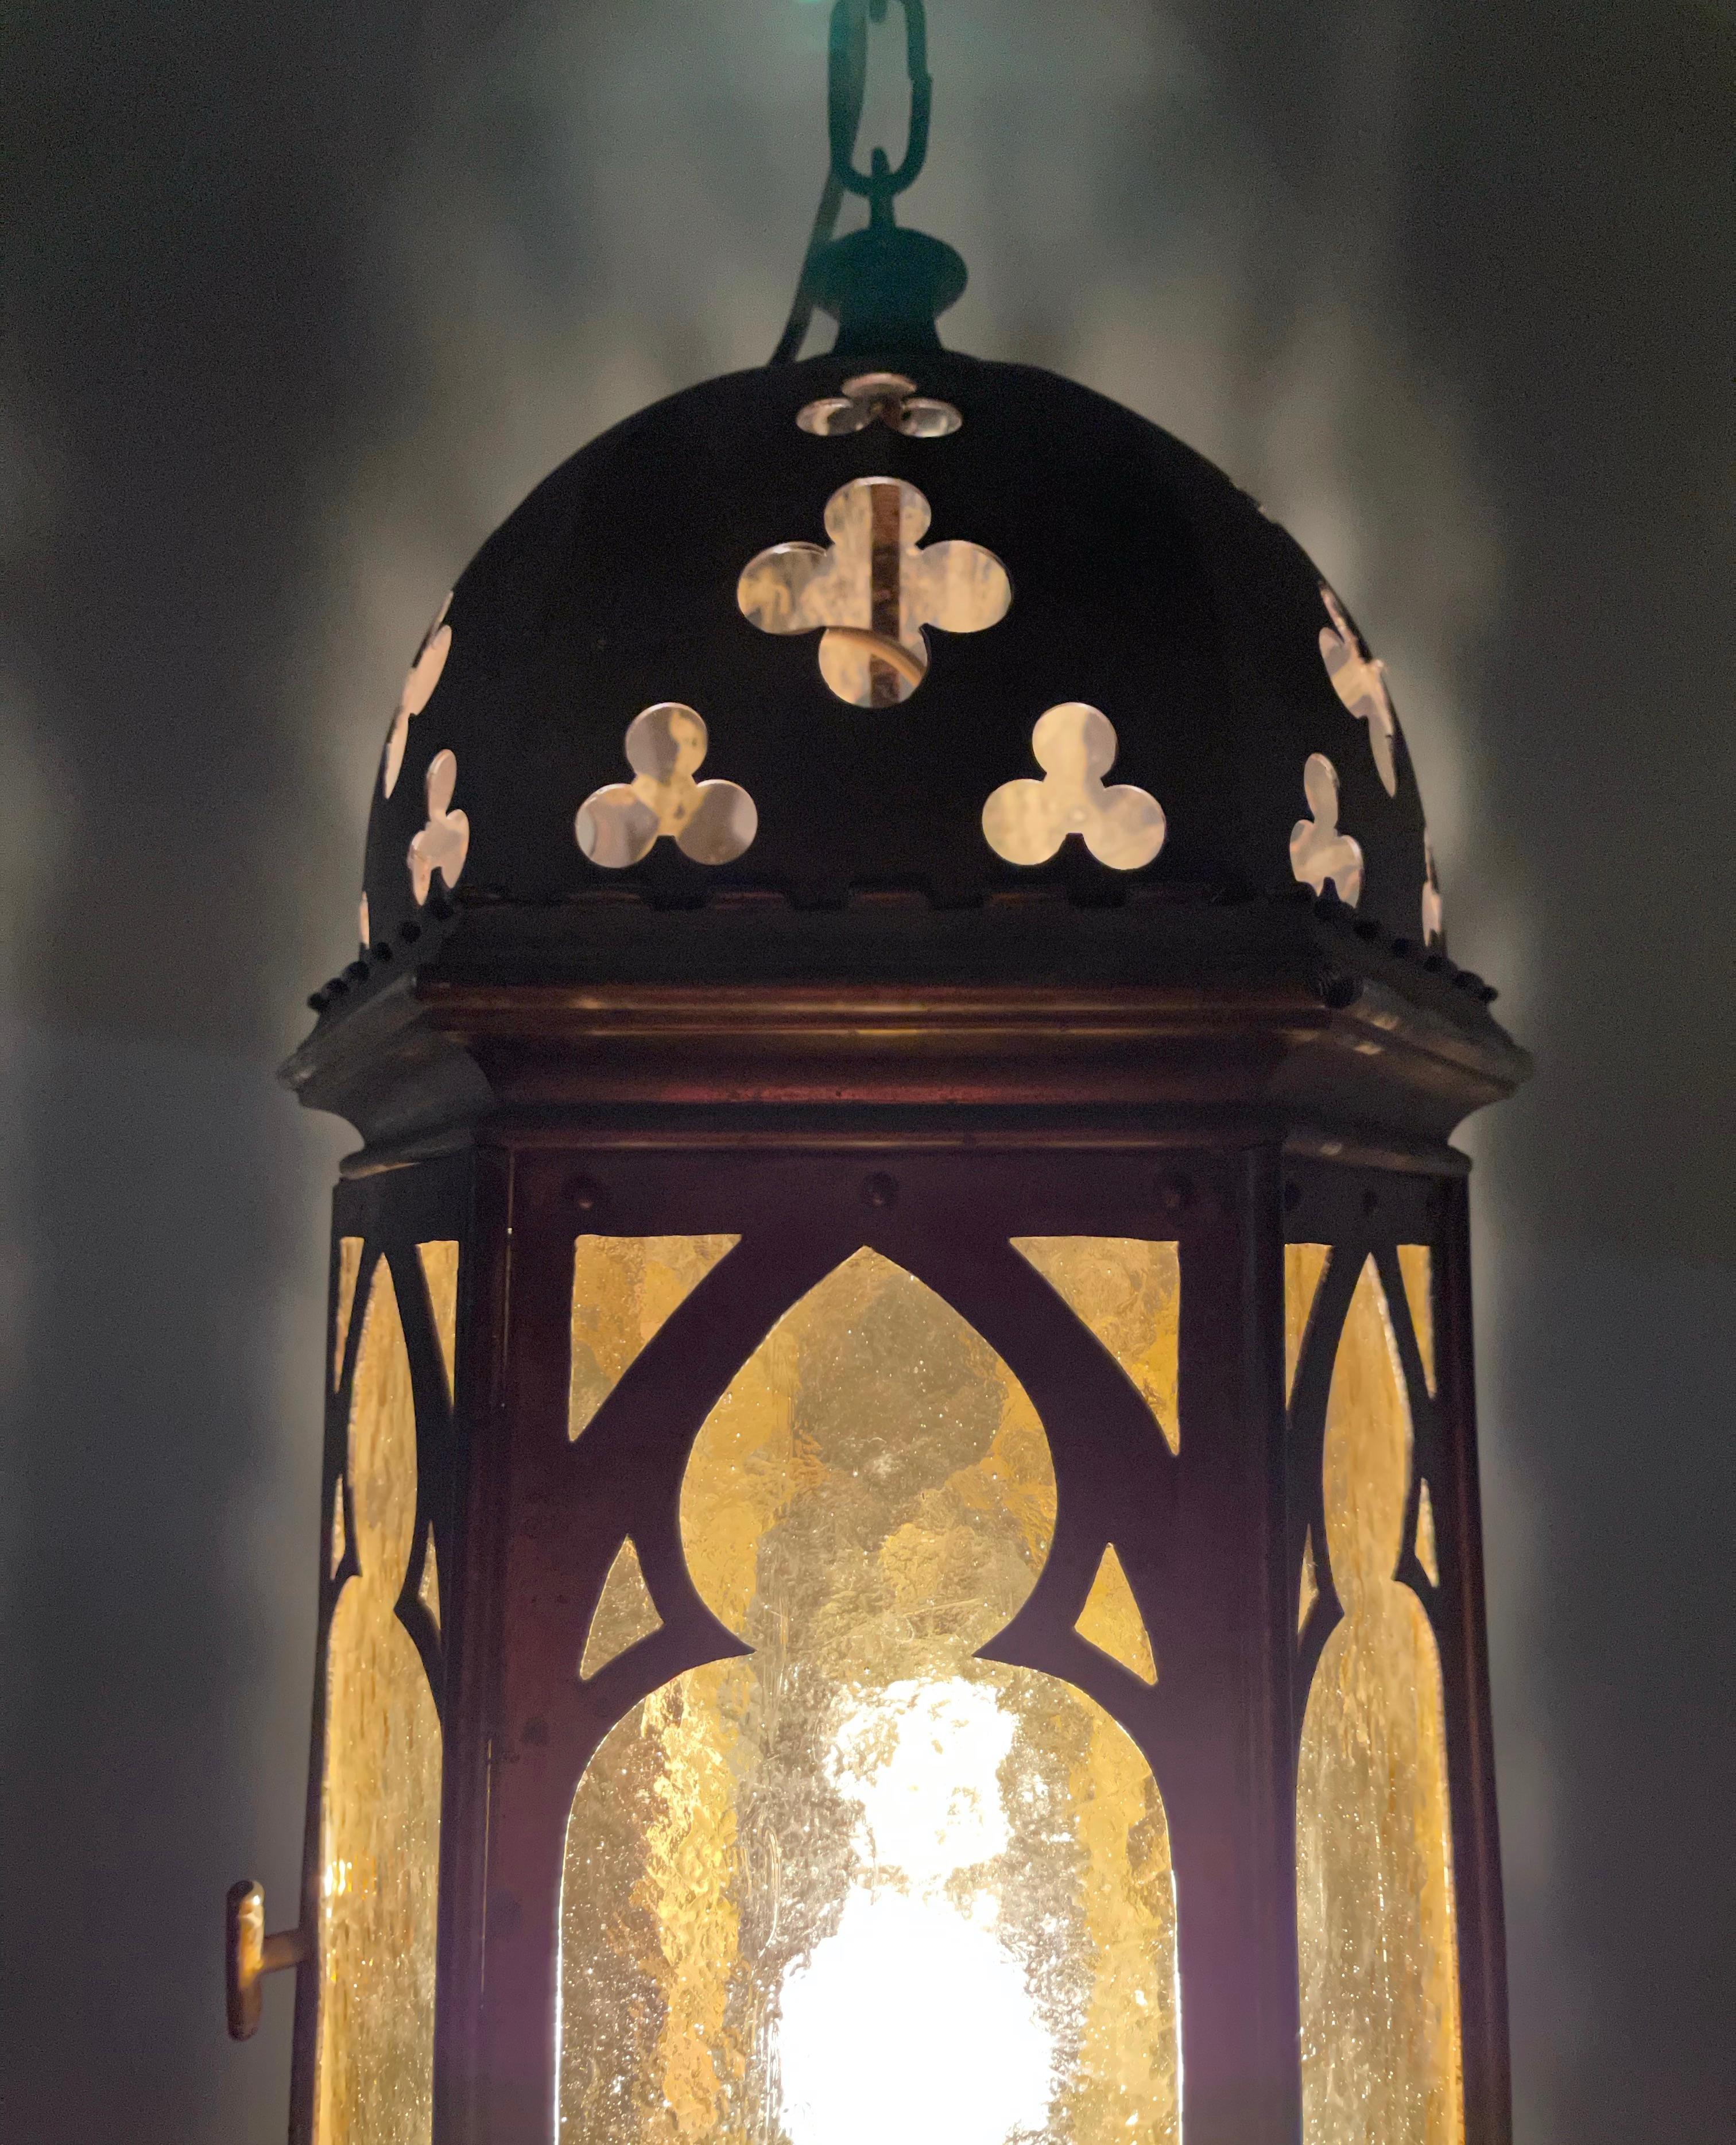 European Rare Antique & Stylish Gothic Revival Brass Lantern with Cathedral Glass Windows